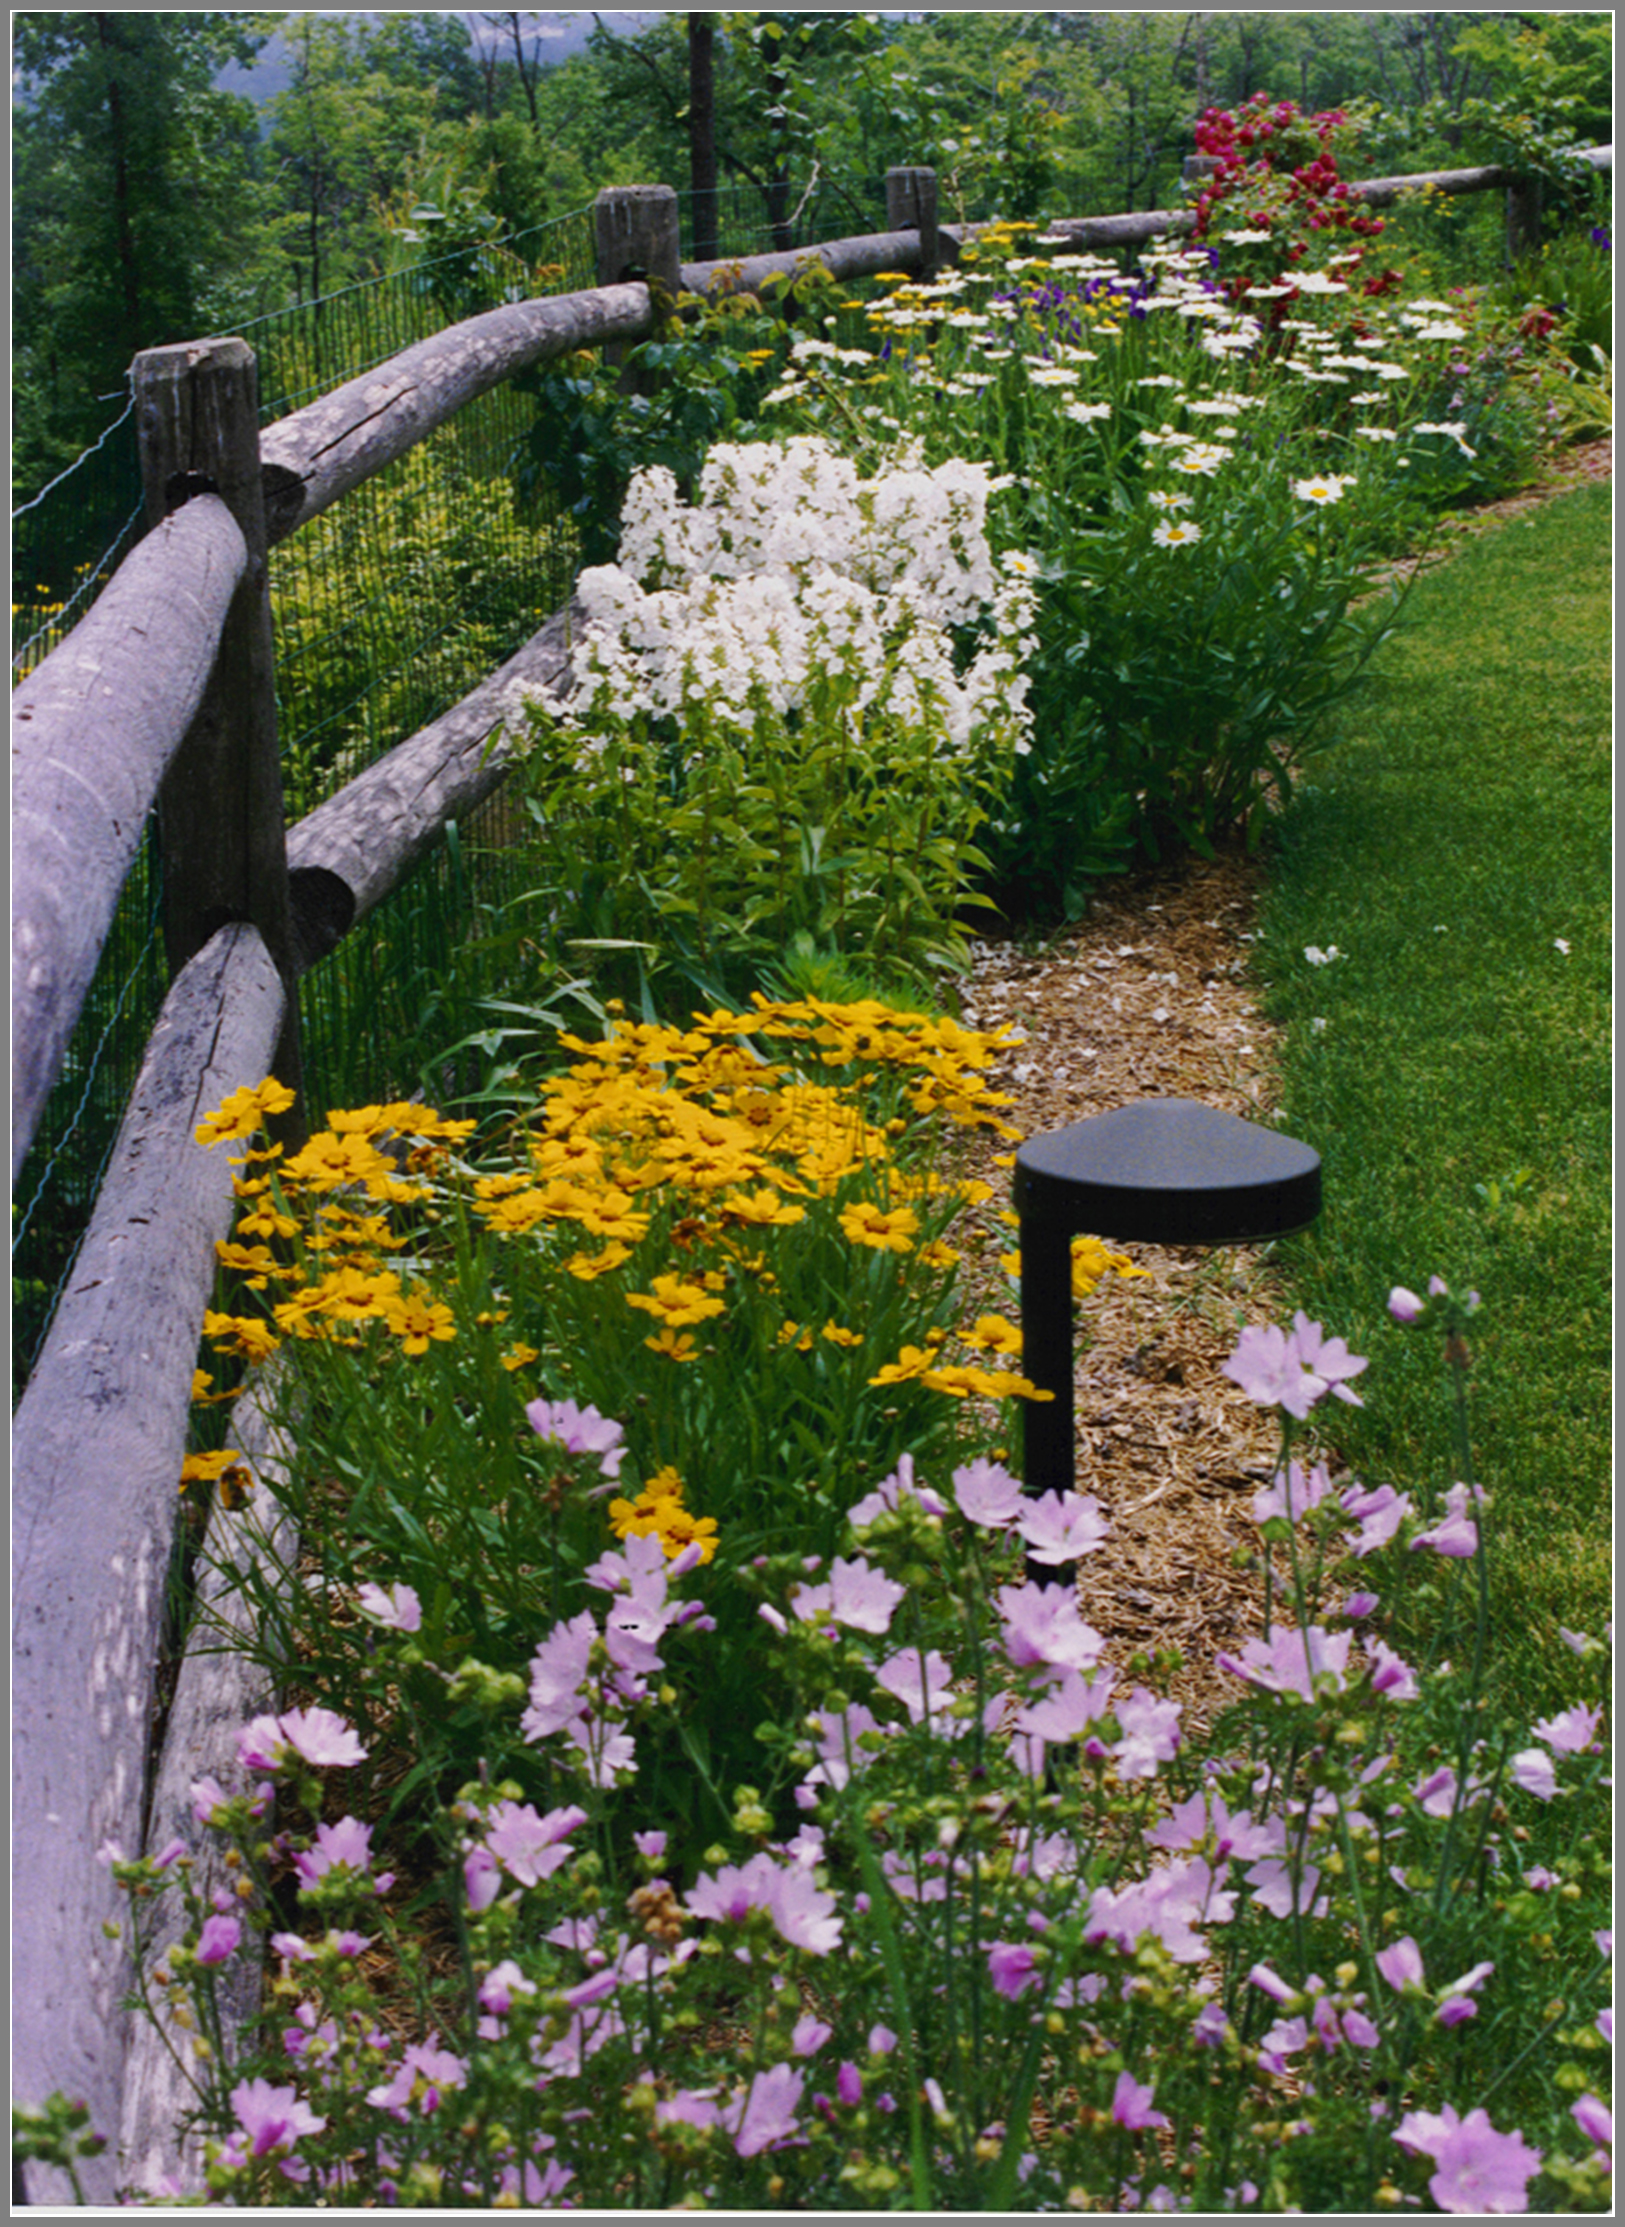 Post and rail fence with gardens